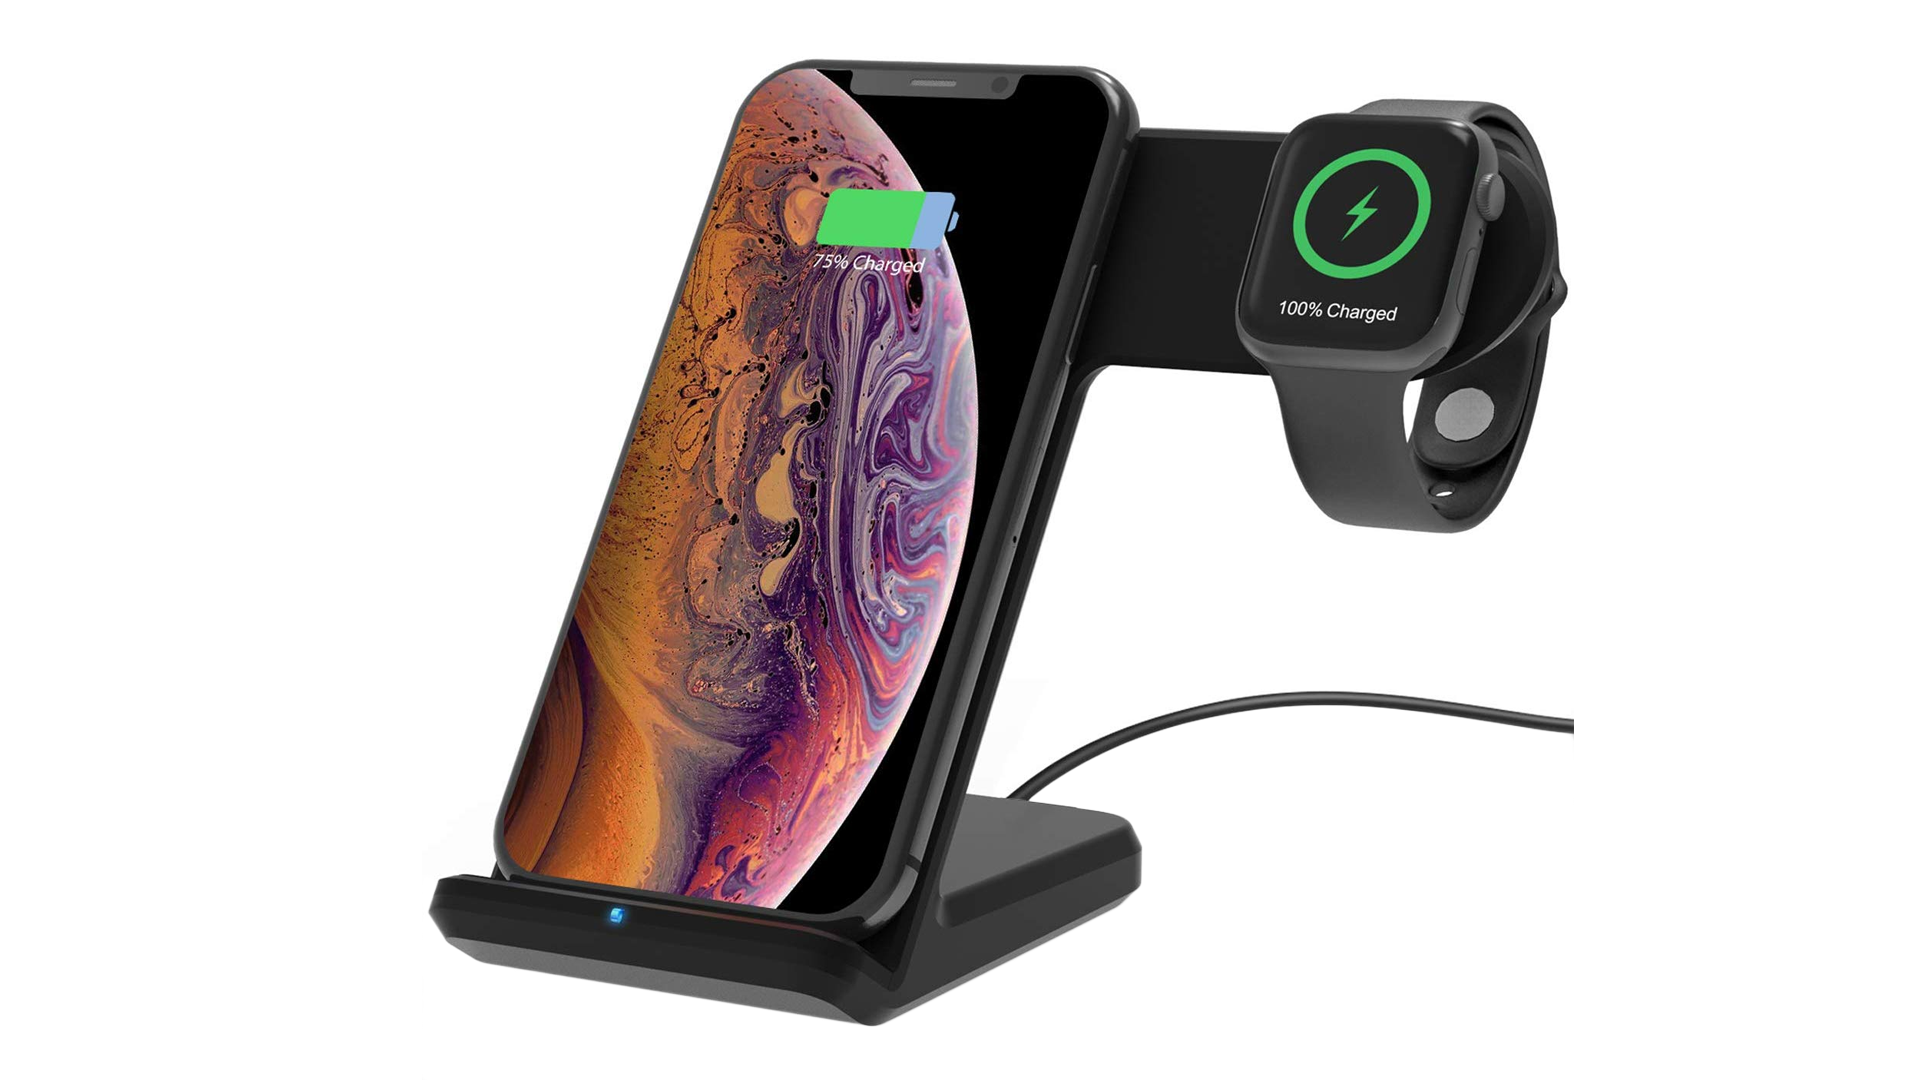 The MQOUNY Wireless Charging Stand